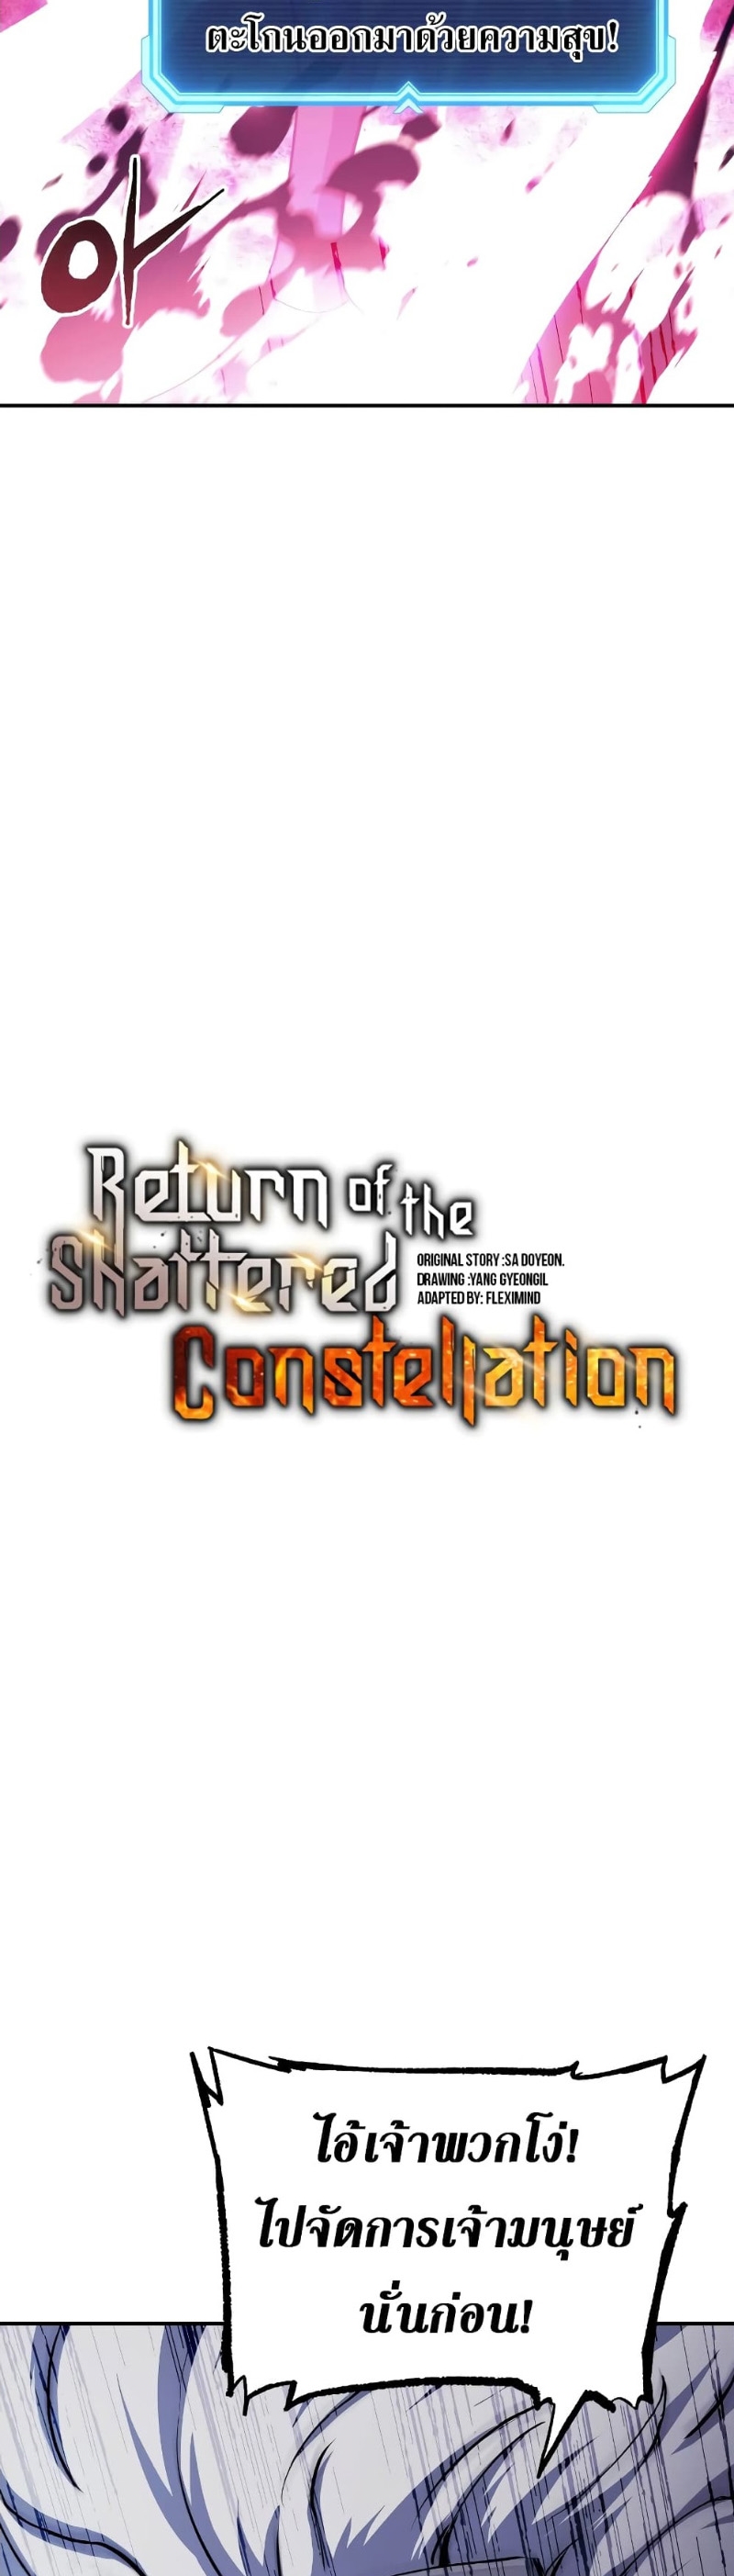 eturn of the shattered constellation 79.14